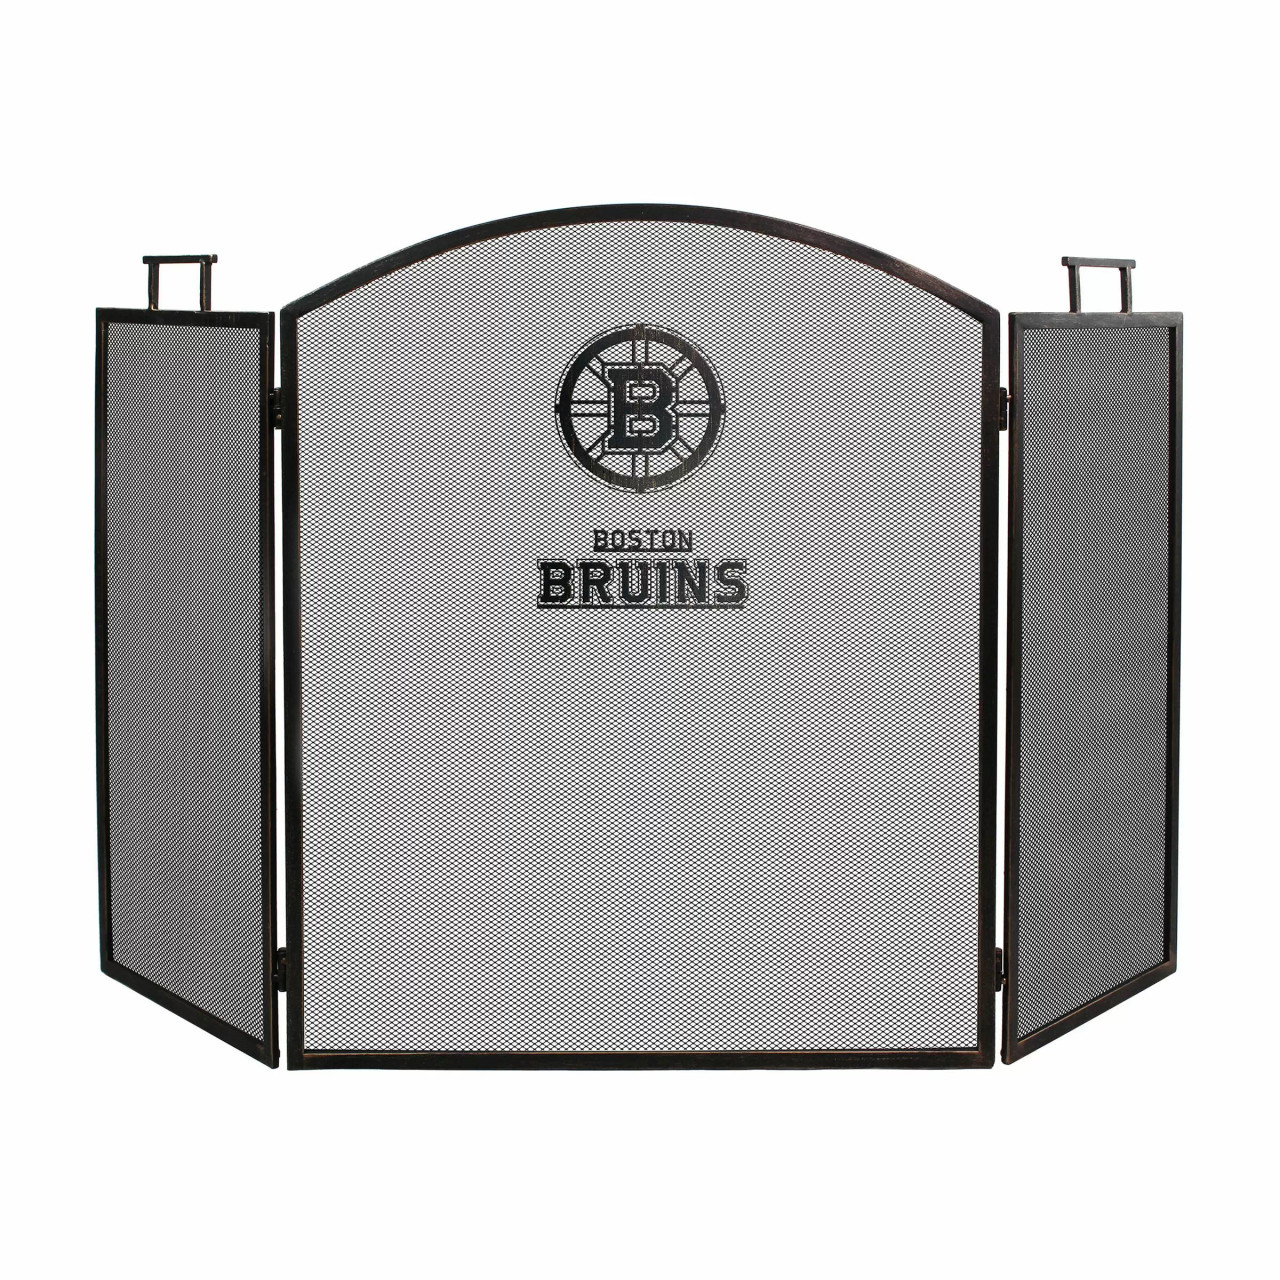 836-4001, Boston. Bruins. 52". Wrought. Iron. Fireplace. Screen, FREE SHIPPING, NHL, Imperial